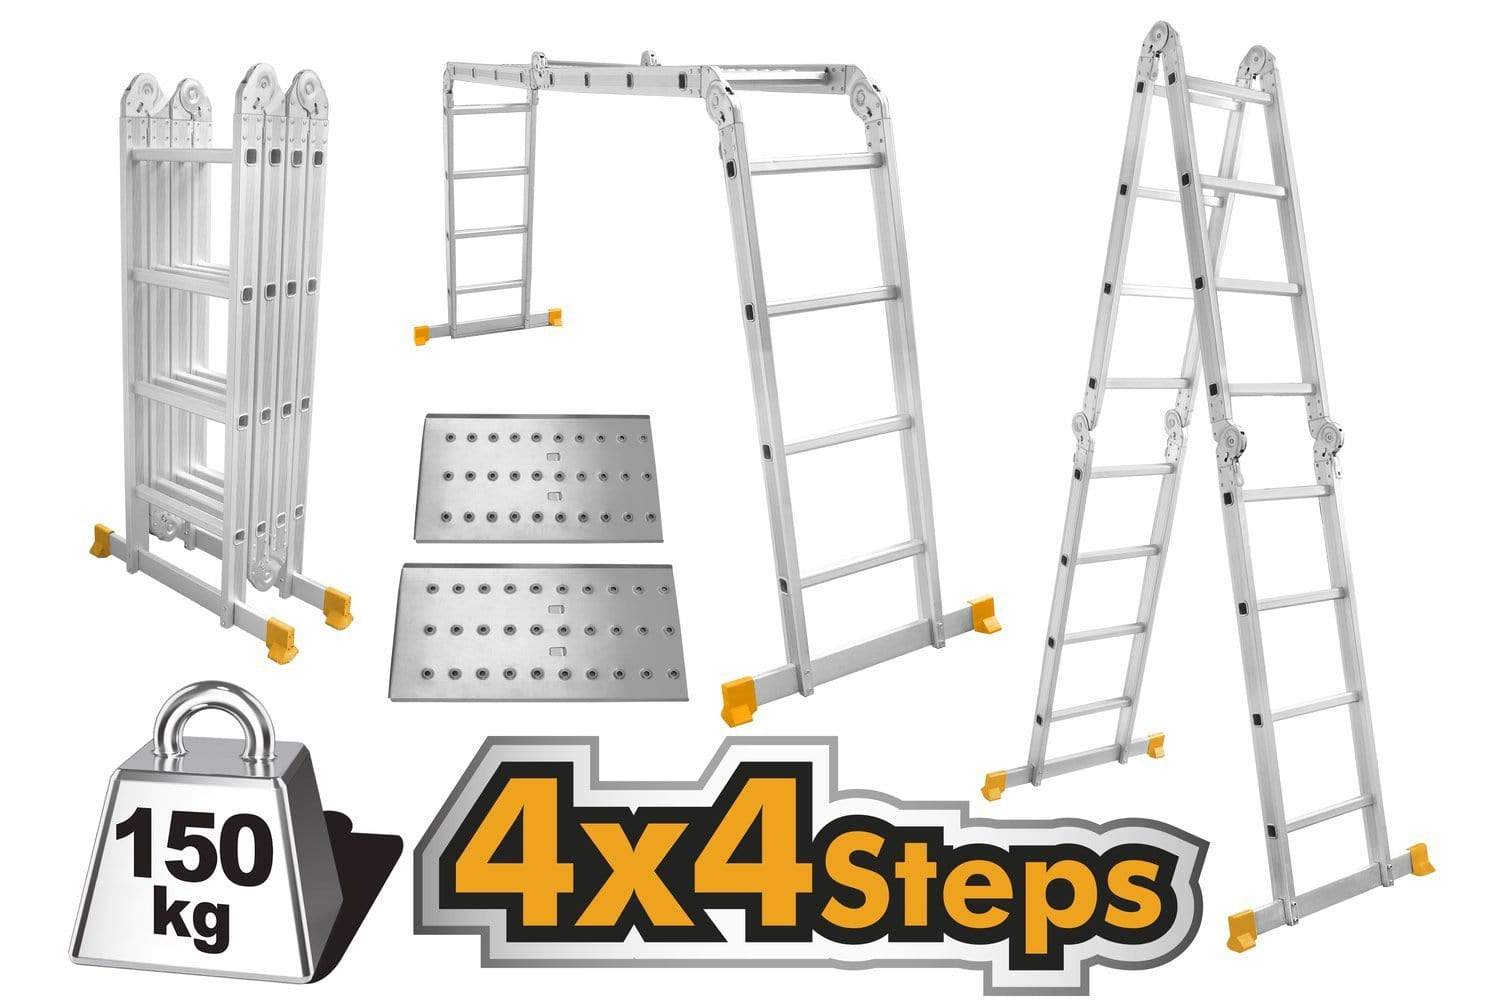 Ingco 3 Section Extension Ladder - HLAD03391 | Supply Master | Accra, Ghana Steel & Engineering Building Steel Engineering Hardware tool